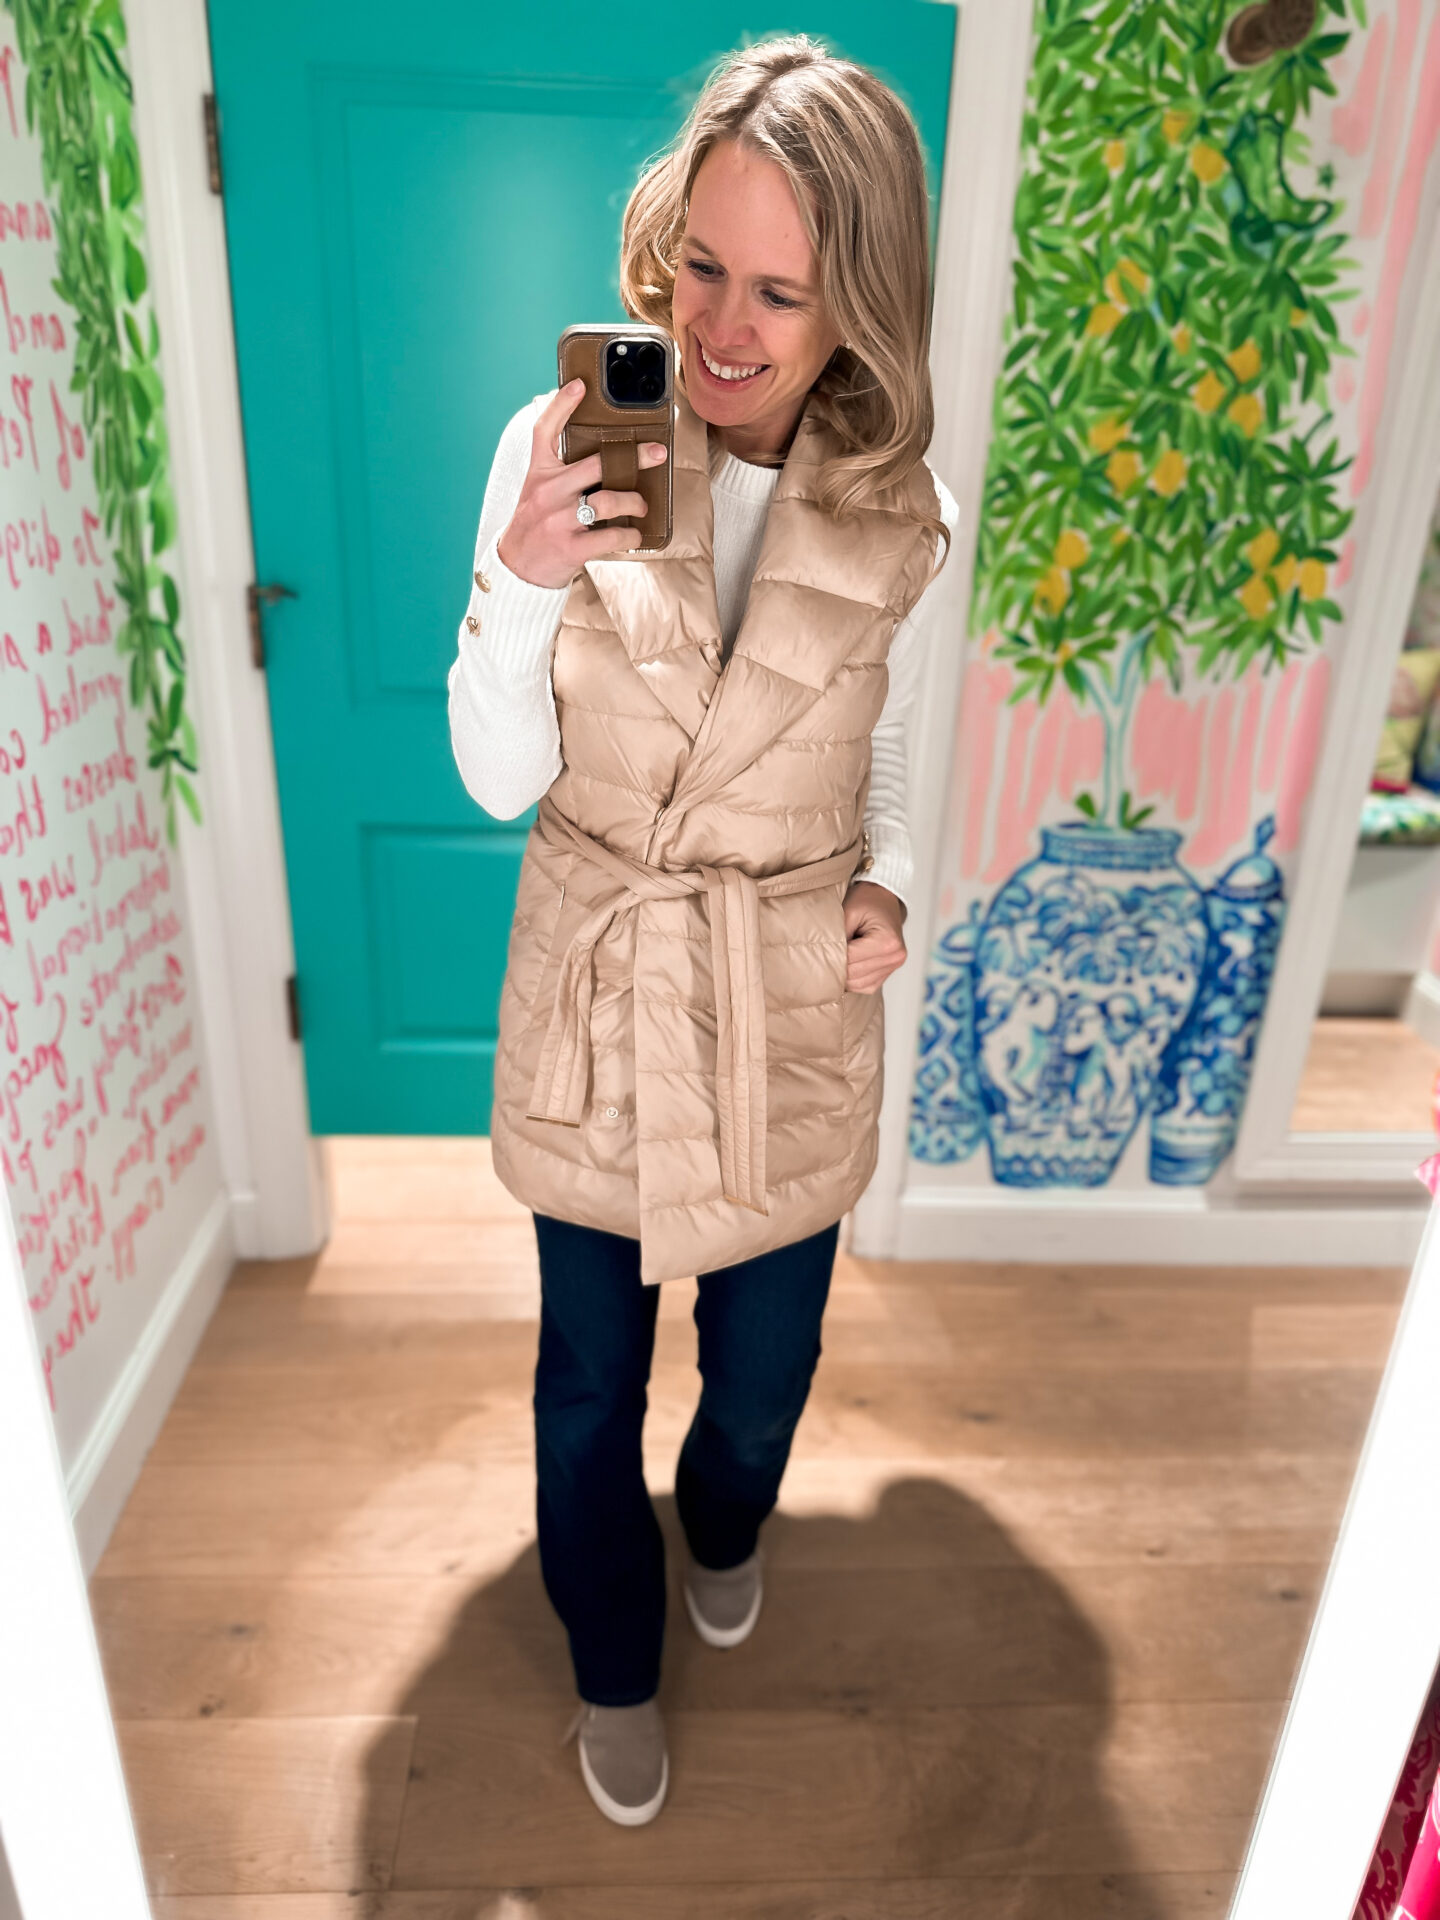 Lilly Pulitzer Surprise Sale | Lilly Pulitzer puffer vest